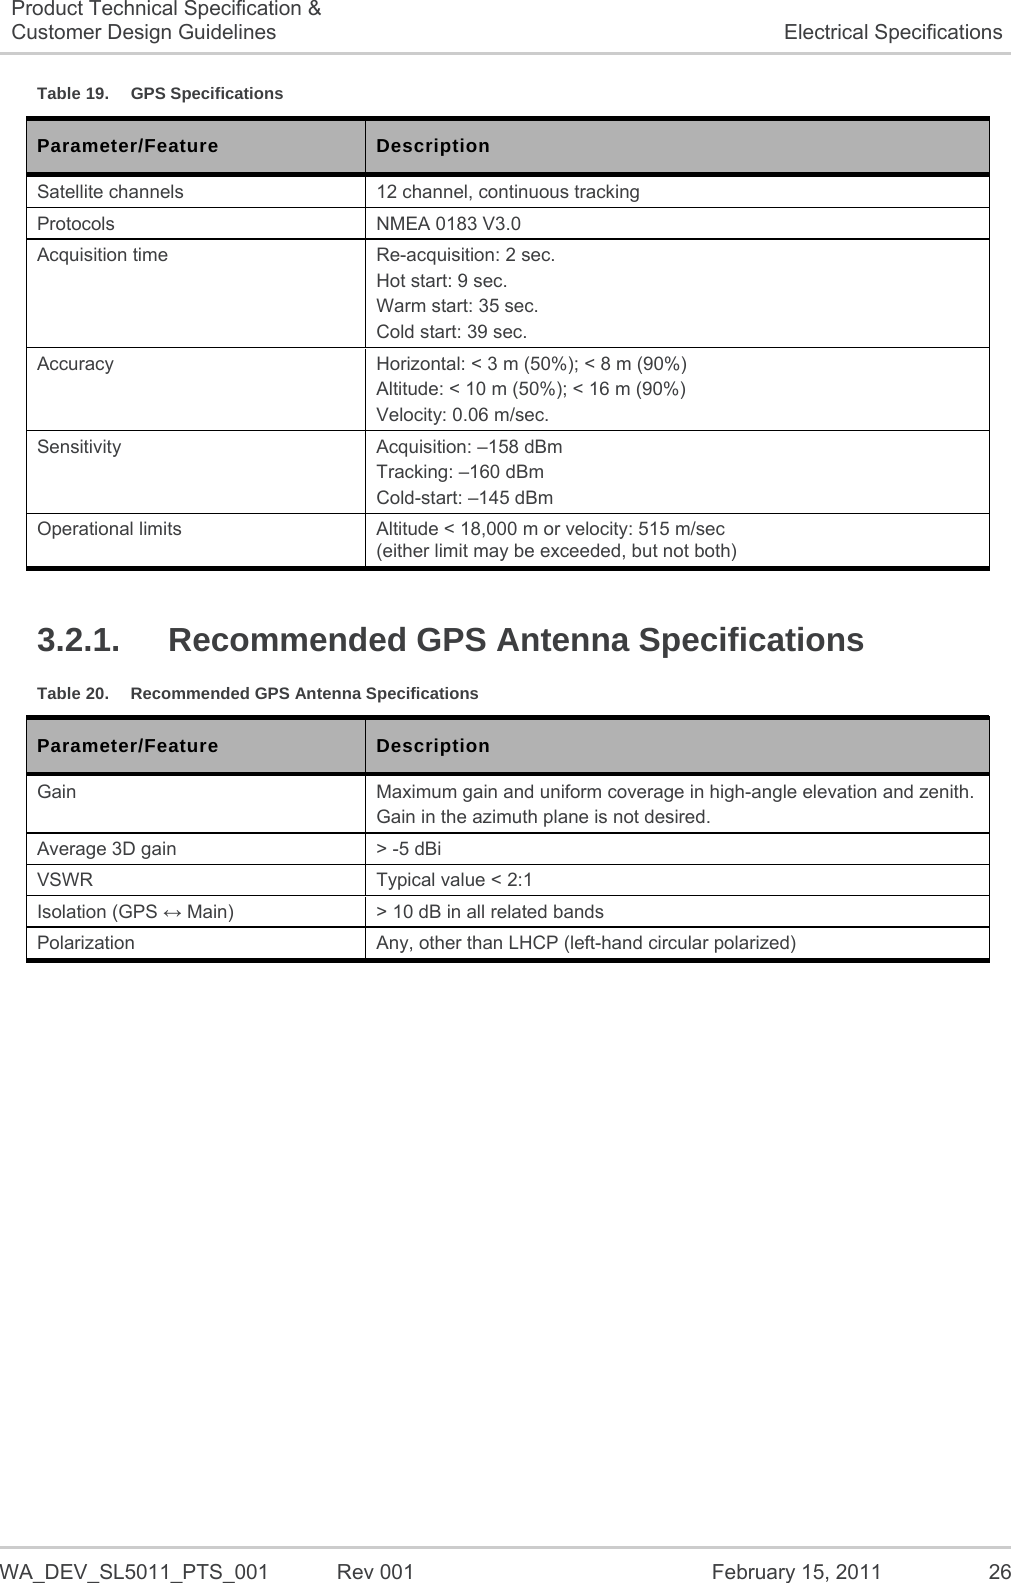   WA_DEV_SL5011_PTS_001  Rev 001  February 15, 2011  26 Product Technical Specification &amp; Customer Design Guidelines  Electrical Specifications Table 19.  GPS Specifications Parameter/Feature Description Satellite channels  12 channel, continuous tracking      Protocols  NMEA 0183 V3.0 Acquisition time  Re-acquisition: 2 sec. Hot start: 9 sec. Warm start: 35 sec. Cold start: 39 sec. Accuracy  Horizontal: &lt; 3 m (50%); &lt; 8 m (90%) Altitude: &lt; 10 m (50%); &lt; 16 m (90%) Velocity: 0.06 m/sec. Sensitivity  Acquisition: –158 dBm Tracking: –160 dBm Cold-start: –145 dBm Operational limits  Altitude &lt; 18,000 m or velocity: 515 m/sec (either limit may be exceeded, but not both) 3.2.1.  Recommended GPS Antenna Specifications Table 20.  Recommended GPS Antenna Specifications Parameter/Feature Description Gain  Maximum gain and uniform coverage in high-angle elevation and zenith. Gain in the azimuth plane is not desired. Average 3D gain  &gt; -5 dBi VSWR  Typical value &lt; 2:1 Isolation (GPS  Main)  &gt; 10 dB in all related bands Polarization  Any, other than LHCP (left-hand circular polarized)   